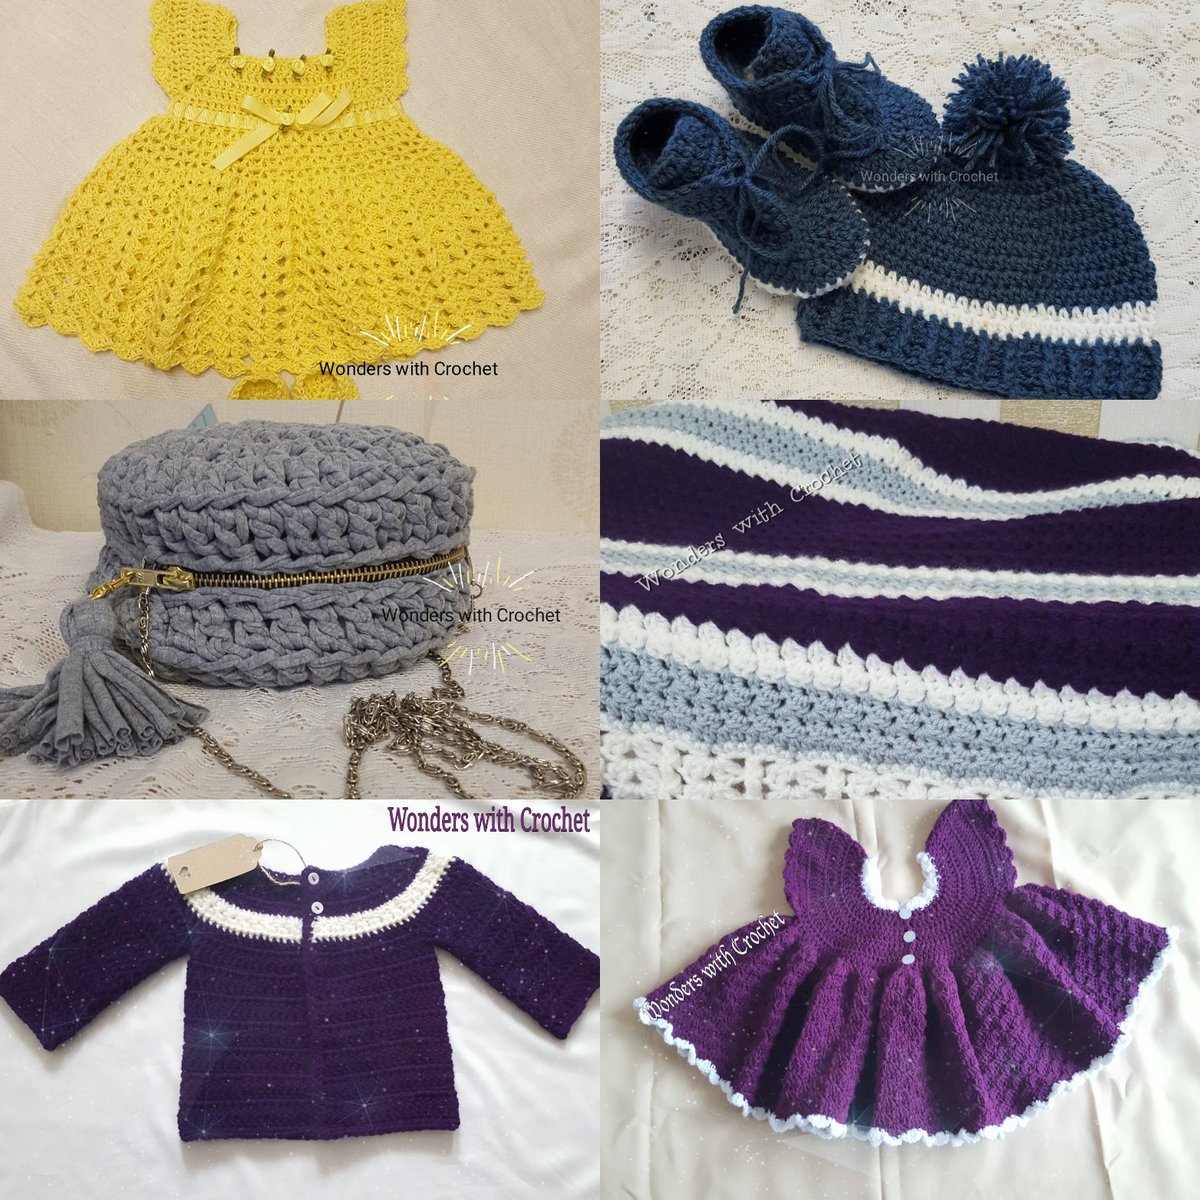 etsy.com/shop/wonderwit…         
Visit my etsy shop👆 for buying gifts and baby items. #leicester #crochet #giftideas #kids #childrensitems #uk #newborn  #crochetitems #handmade #people #etsyseller #craft #etsyshop #crochetaddict #fun #twitter #toddlers#babyhat #facebookpage